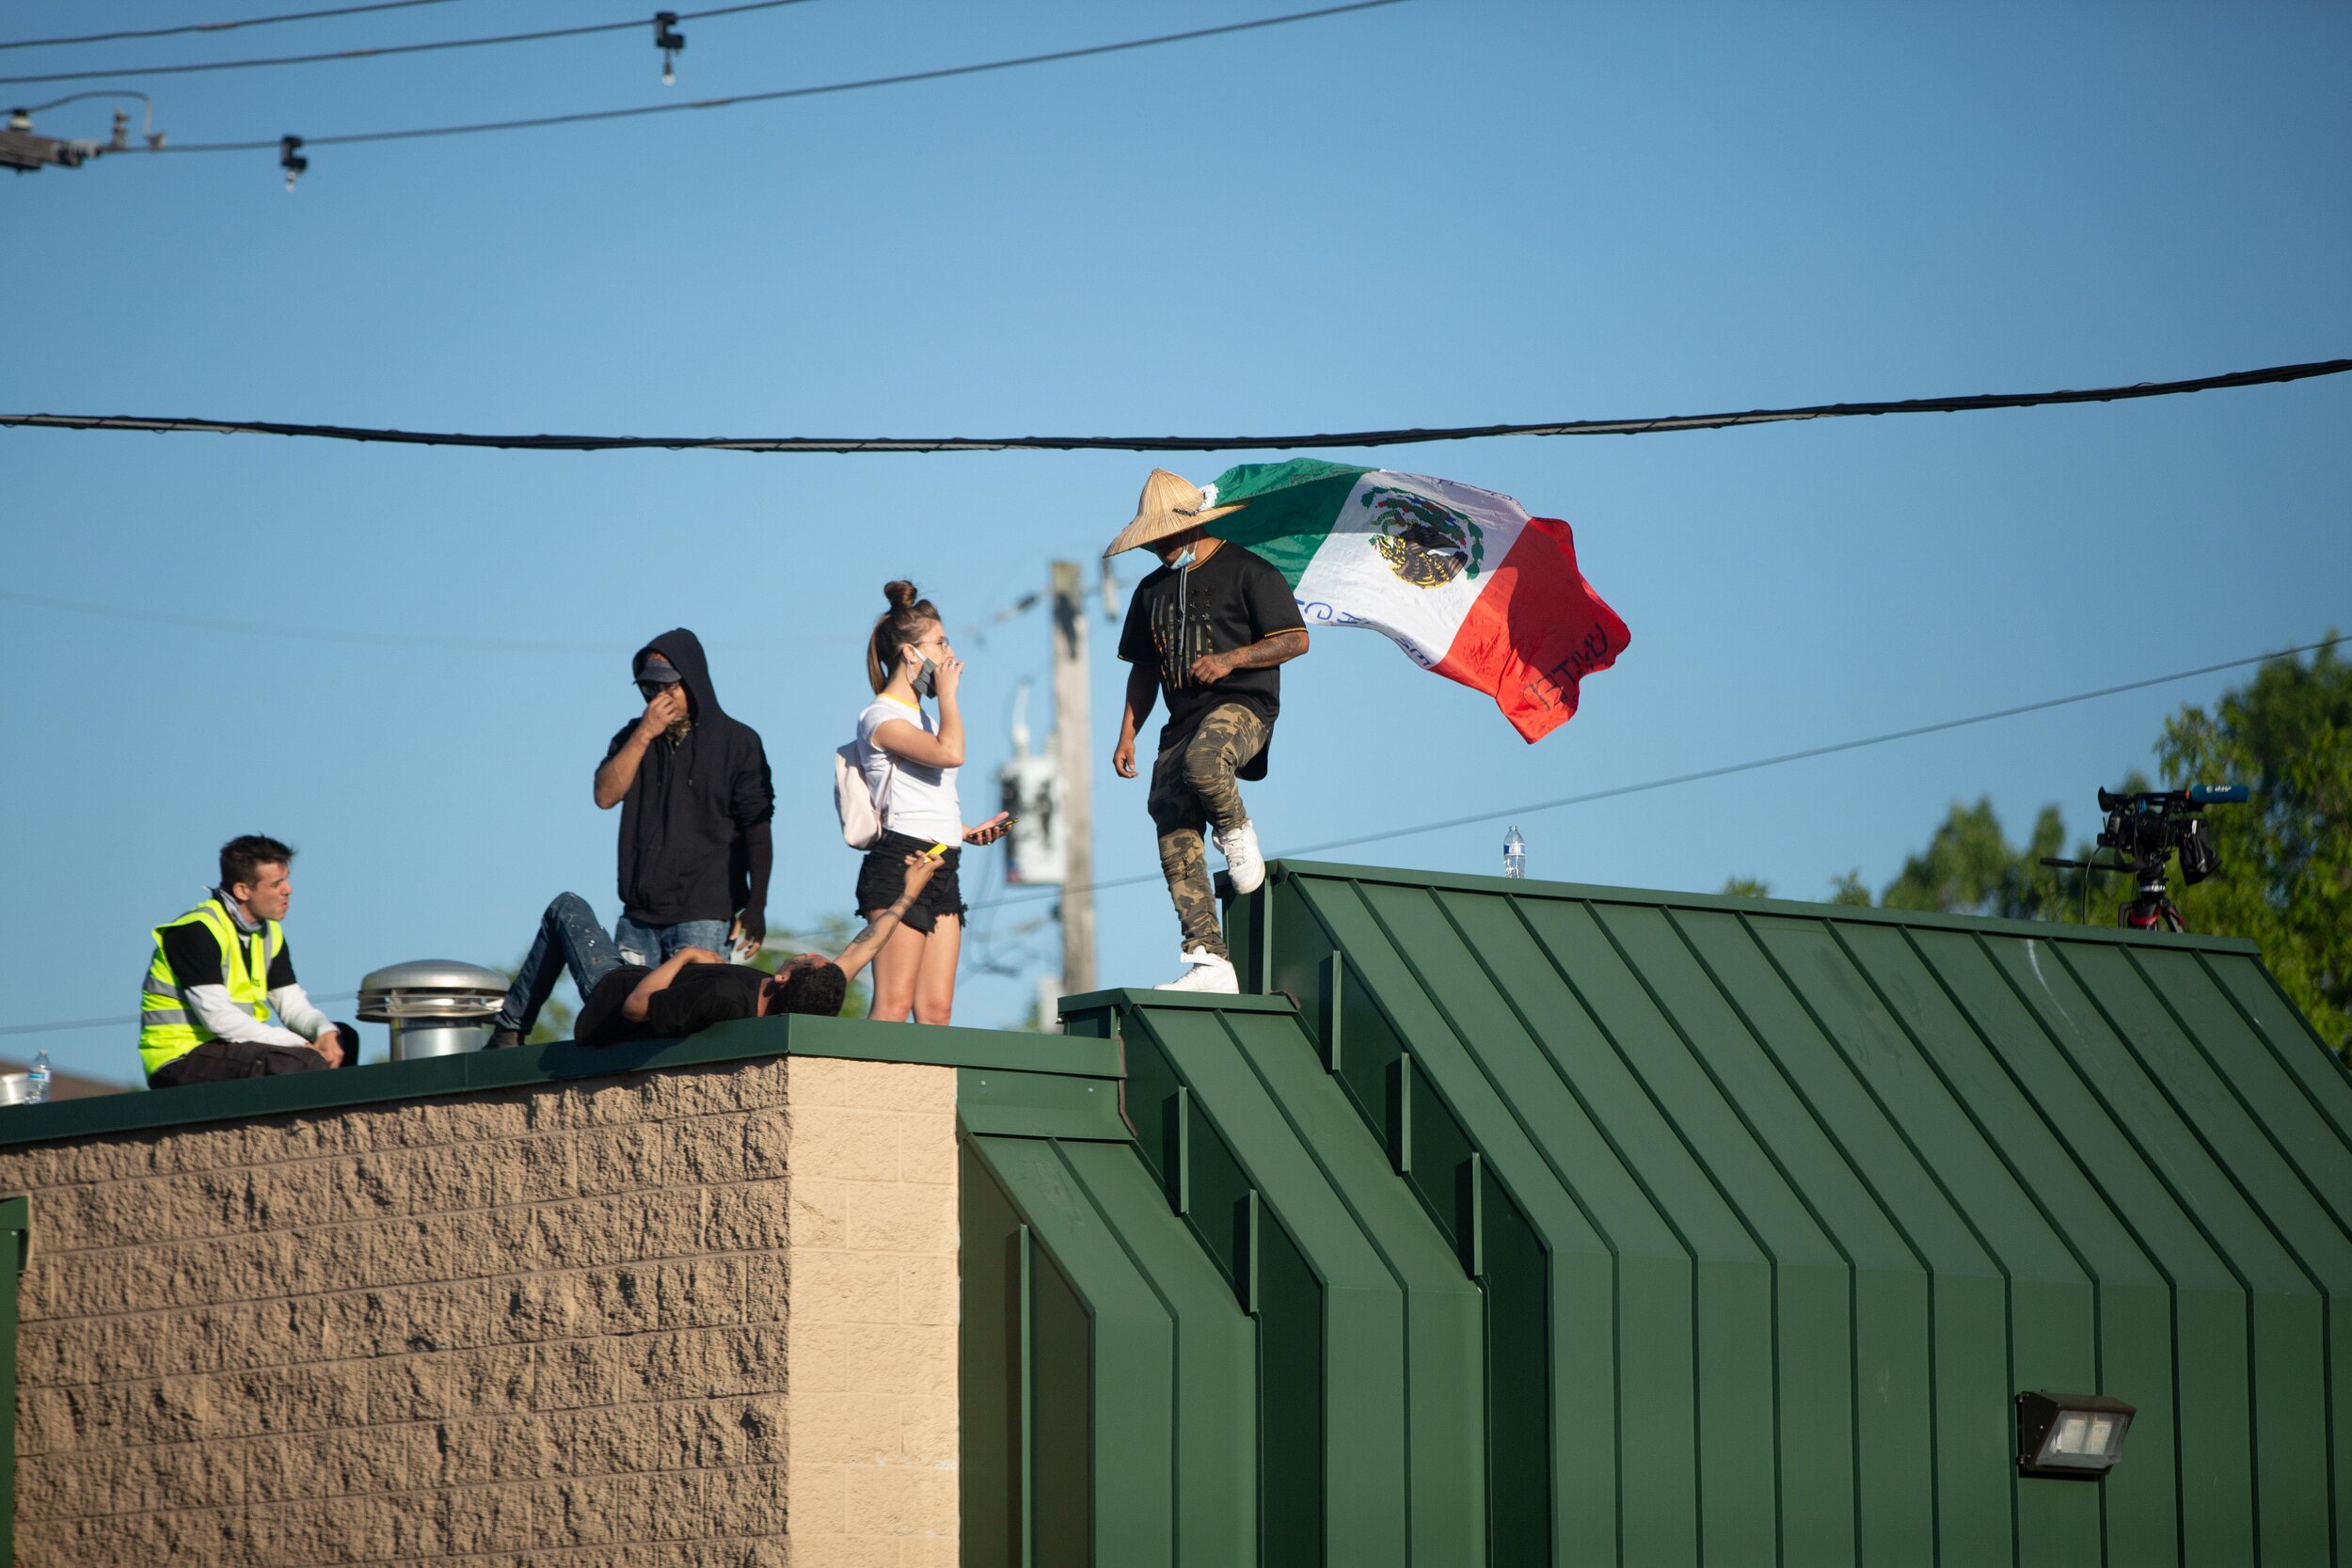  Poretsters stand on the roof of a strip mall that was looted the previous night during a protest over the police killing of George Floyd in Minneapolis, Minnesota on May 30, 2020. Chris Juhn/Zuma 